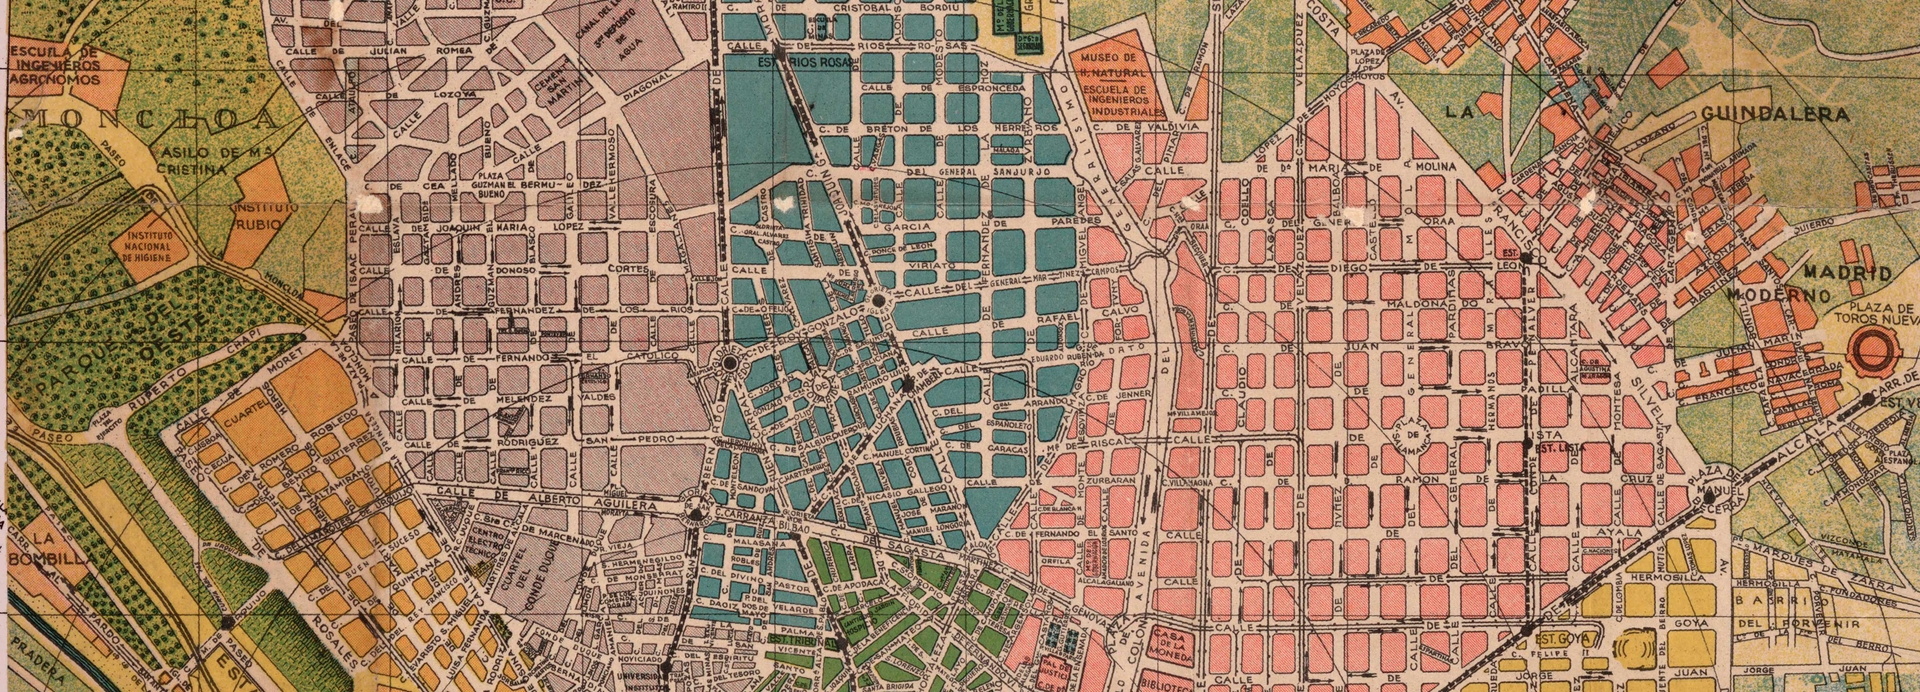 a map image of Madrid before restoration